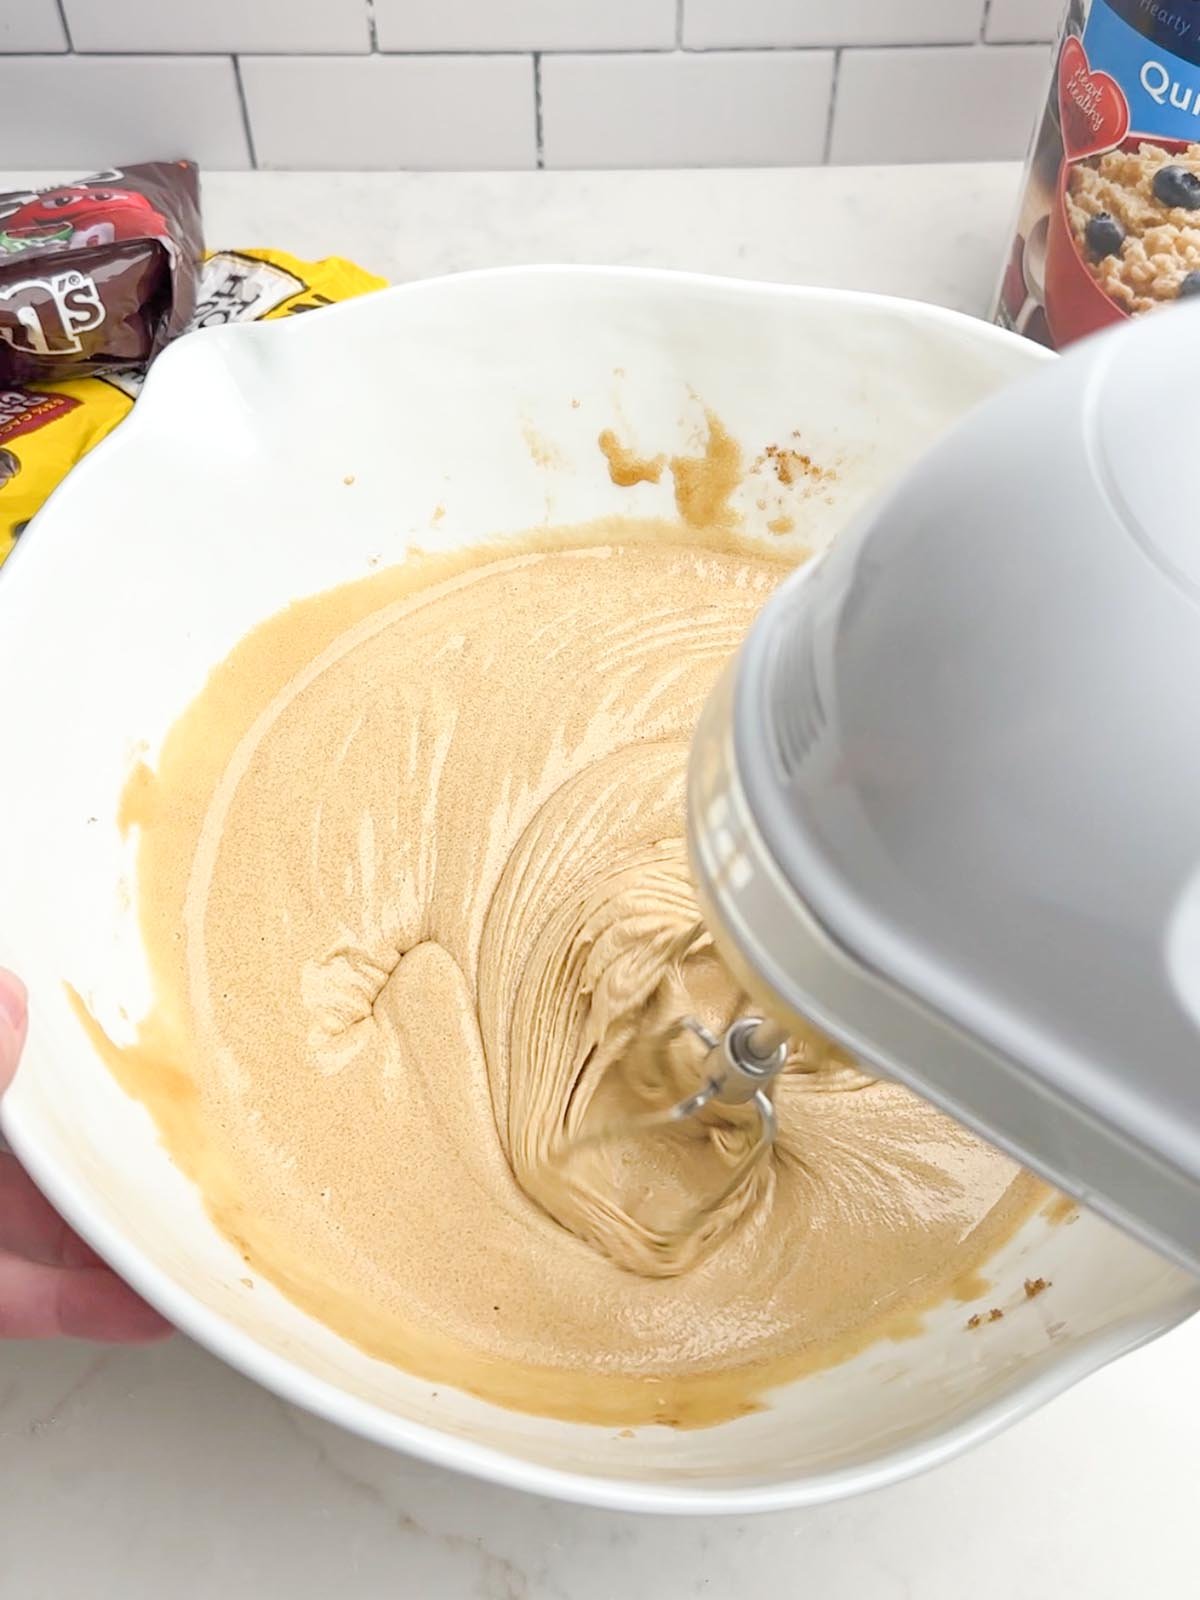 Mixer combining eggs and sugars in a white mixing bowl.